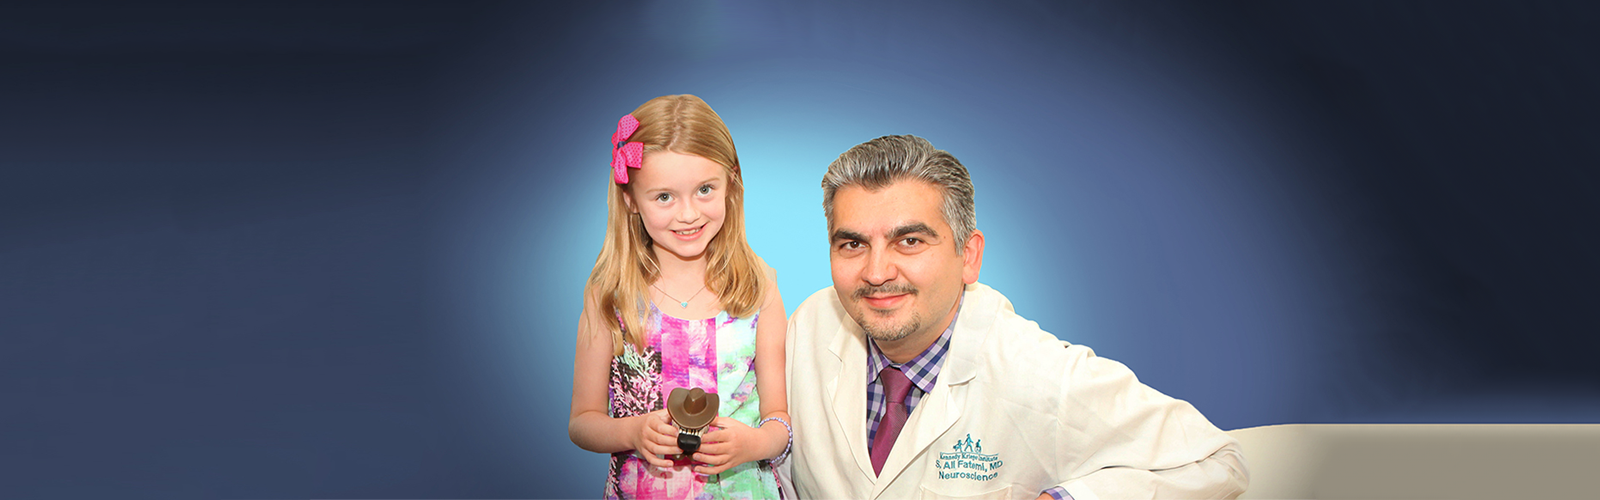 Child and Doctor